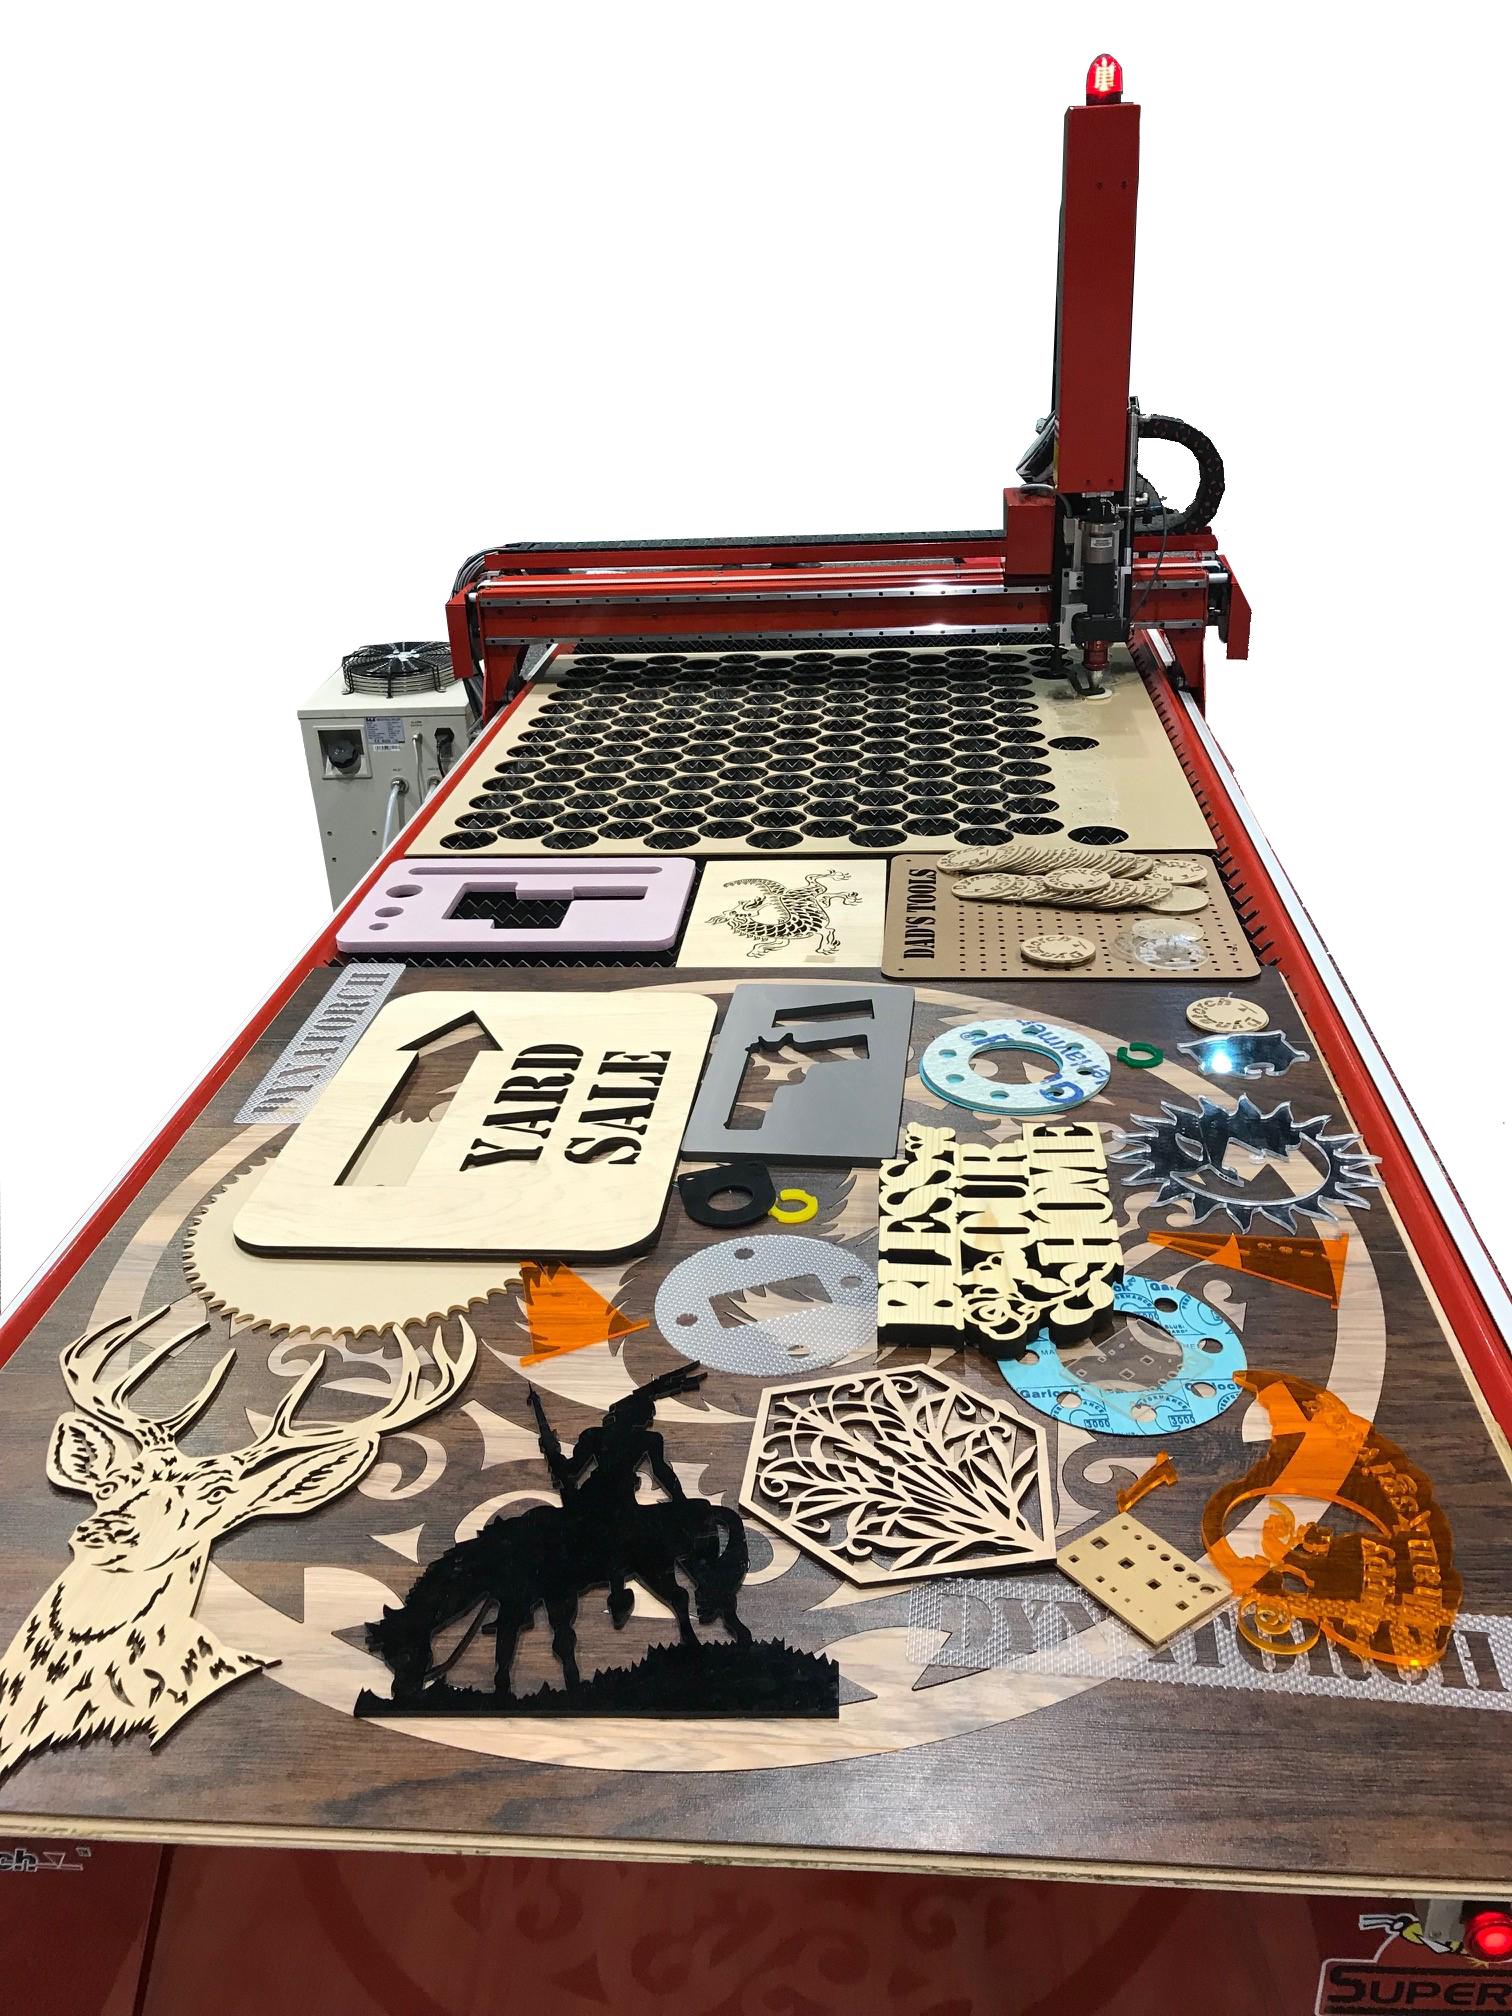 Product CNC Laser Cutting Machines | Laser Engraving and Cutting Machines image